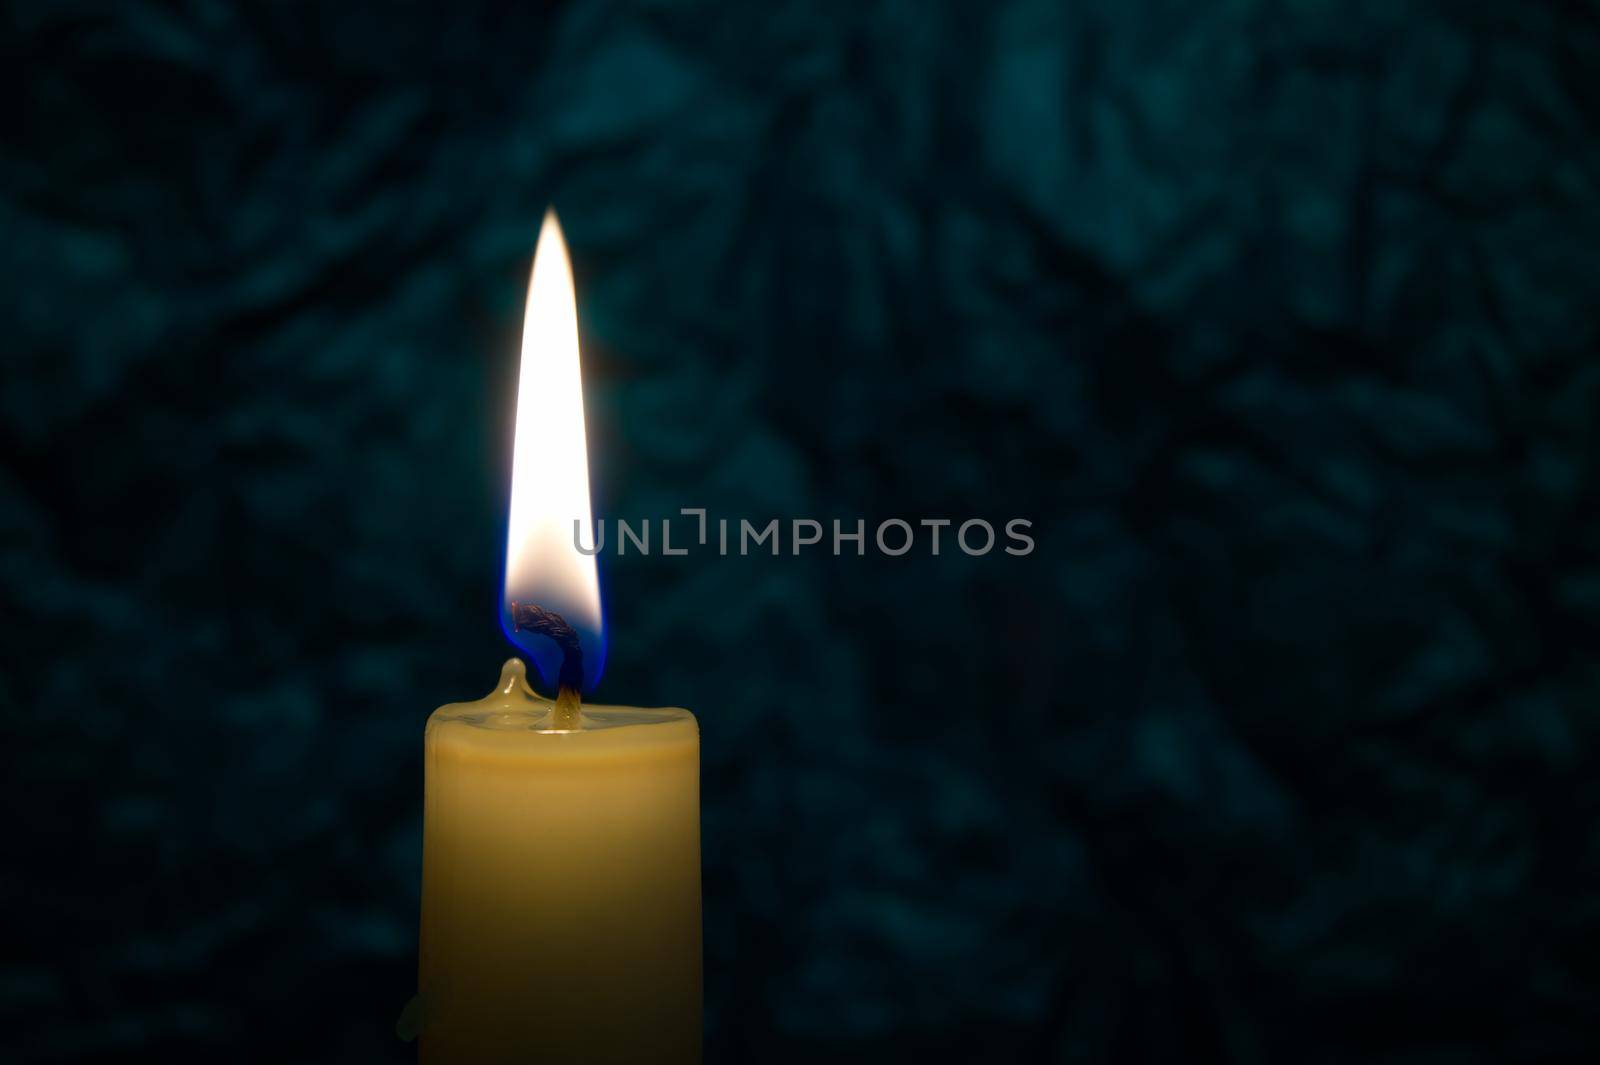 Single yellow wax candle burning alone in the dark background. Conceptual image symbolize peace, love, hope or patience with free copy space